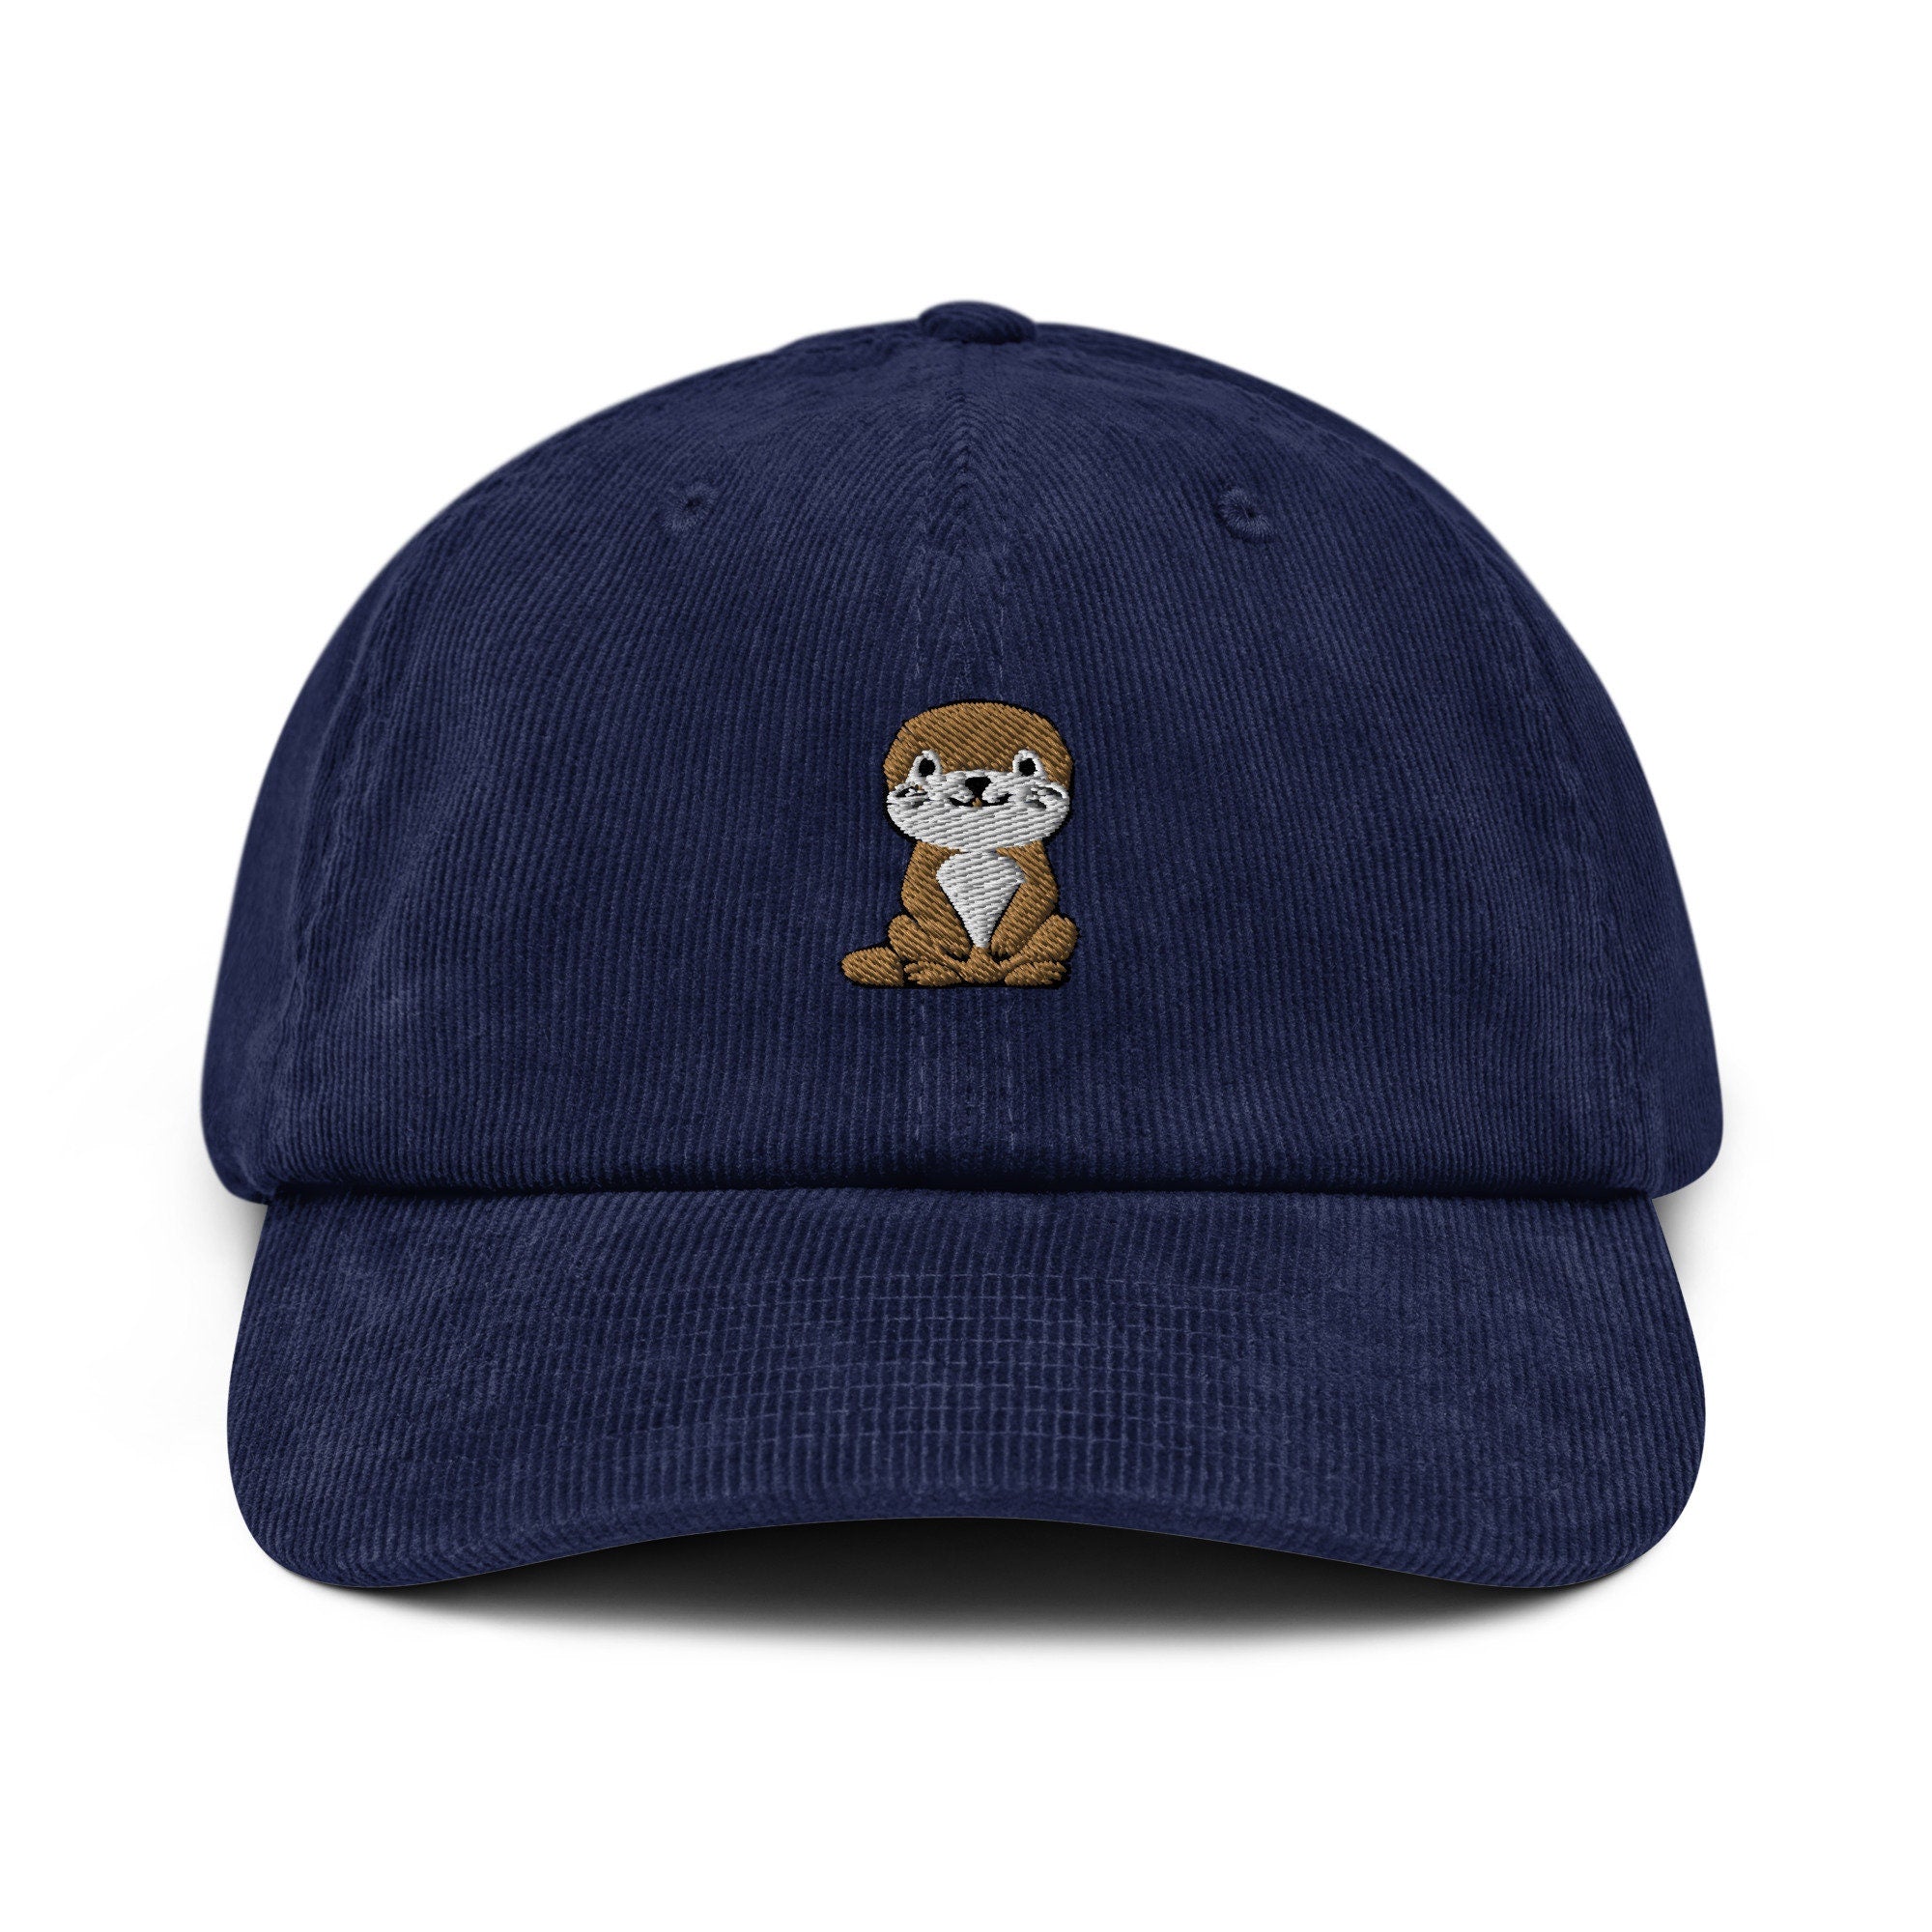 Cute Sea Otter Lover Corduroy Hat, Handmade Embroidered Corduroy Dad Cap - Multiple Colors